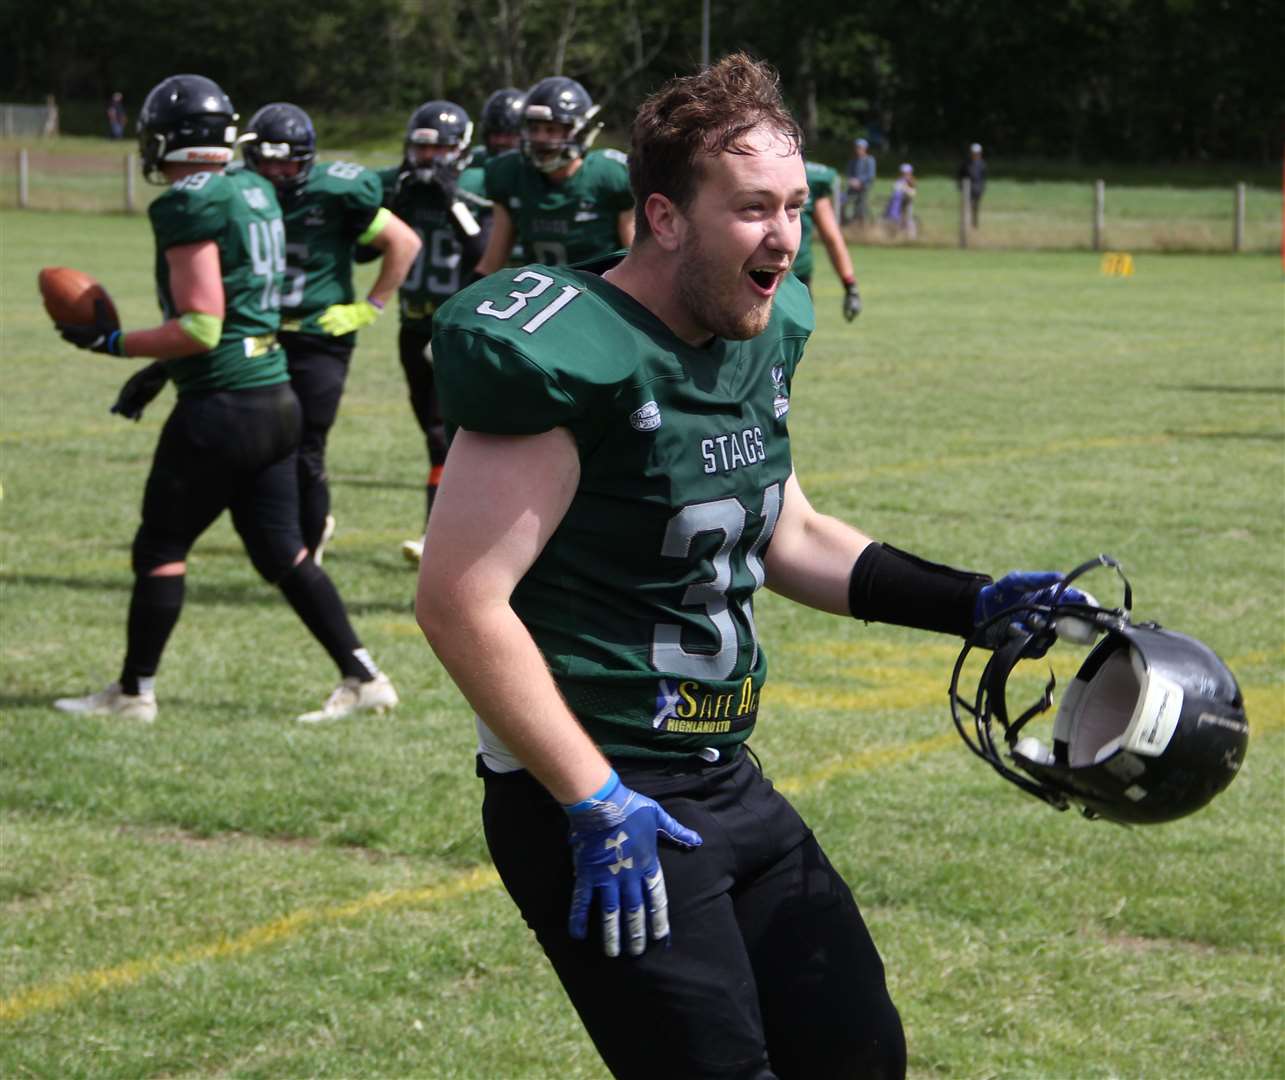 The Highland Stags booked their place in the 2023 BAFA play-offs with a 35-27 win over the Glasgow Tigers.